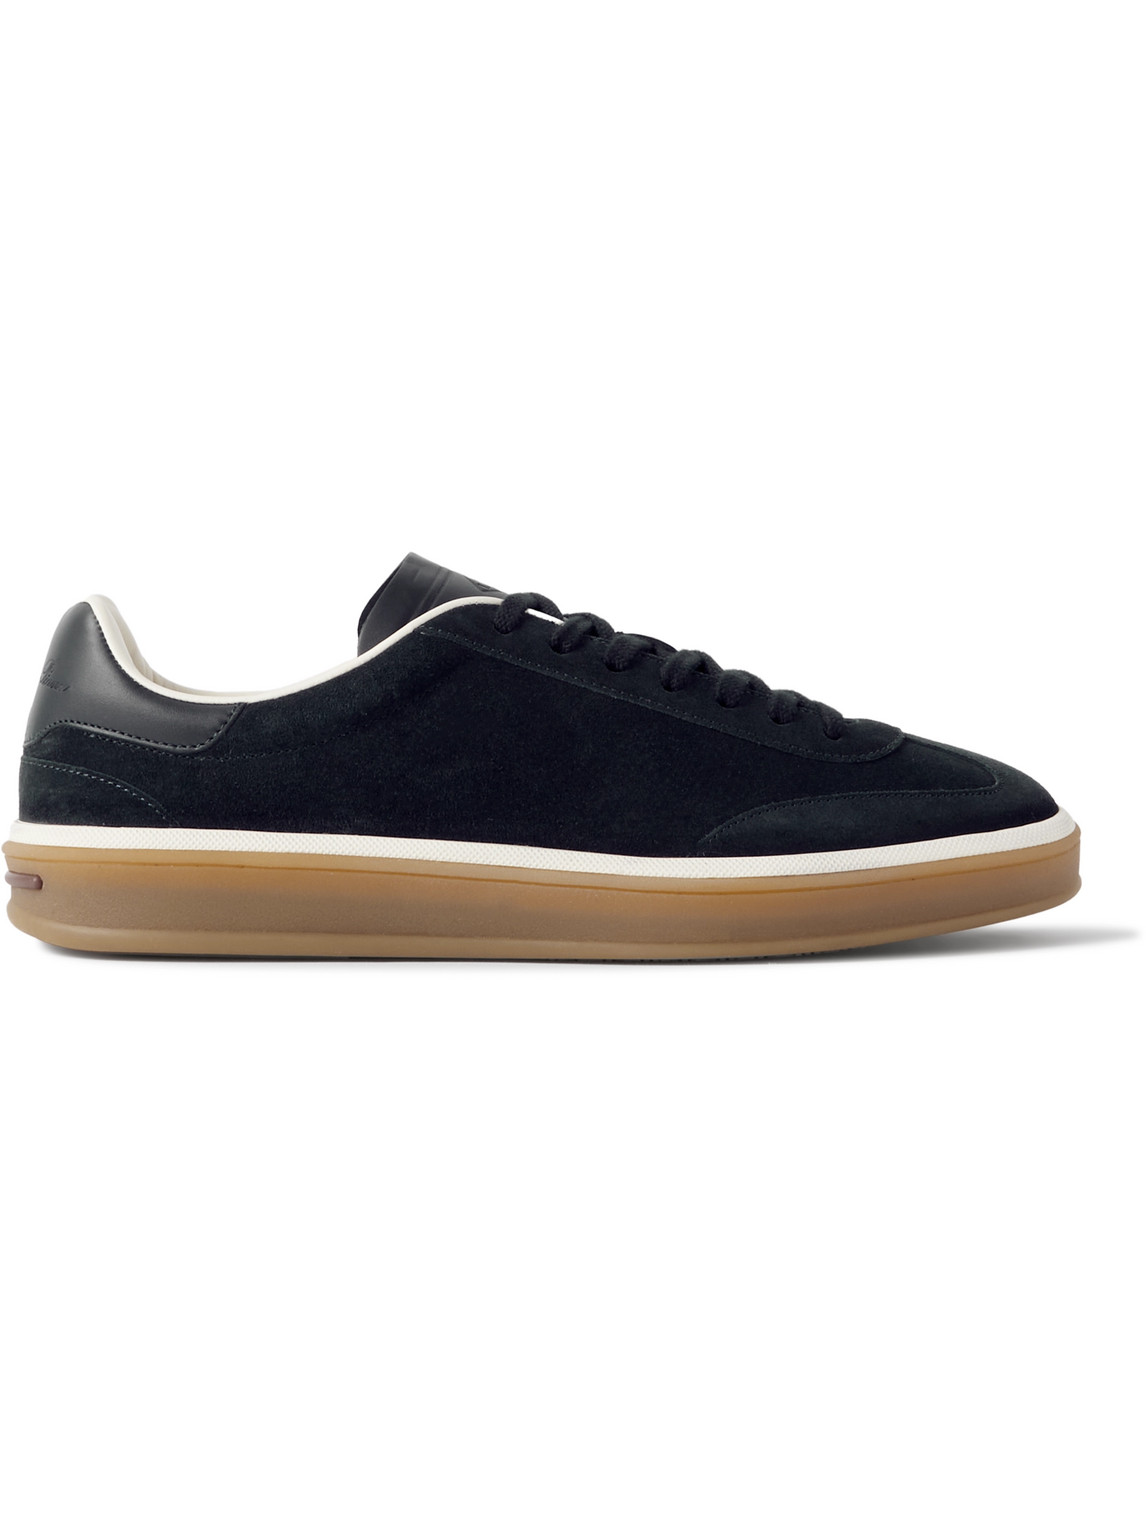 Tennis Walk Leather-Trimmed Suede Sneakers